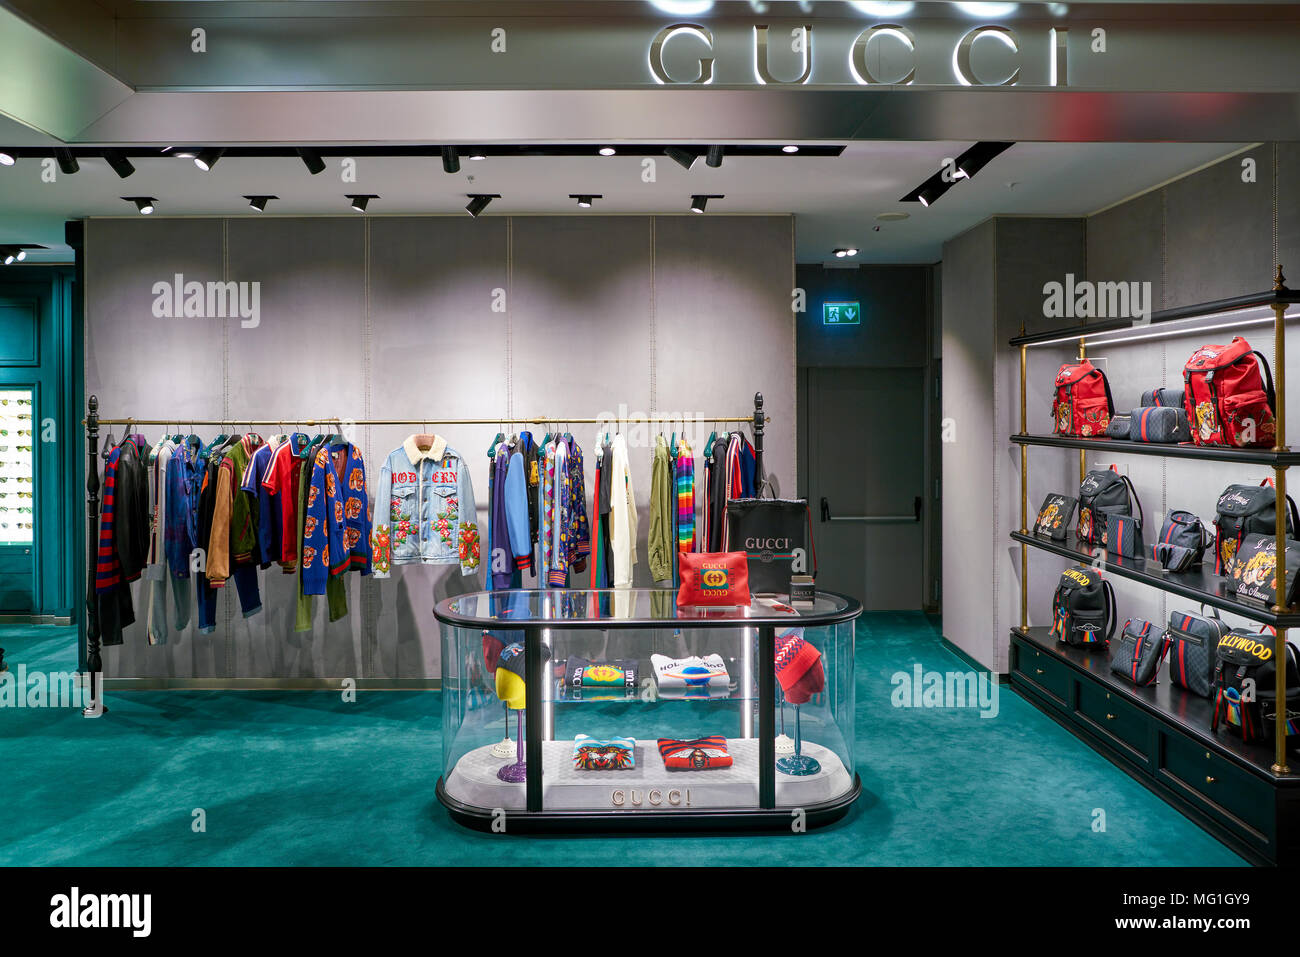 gucci clothing store